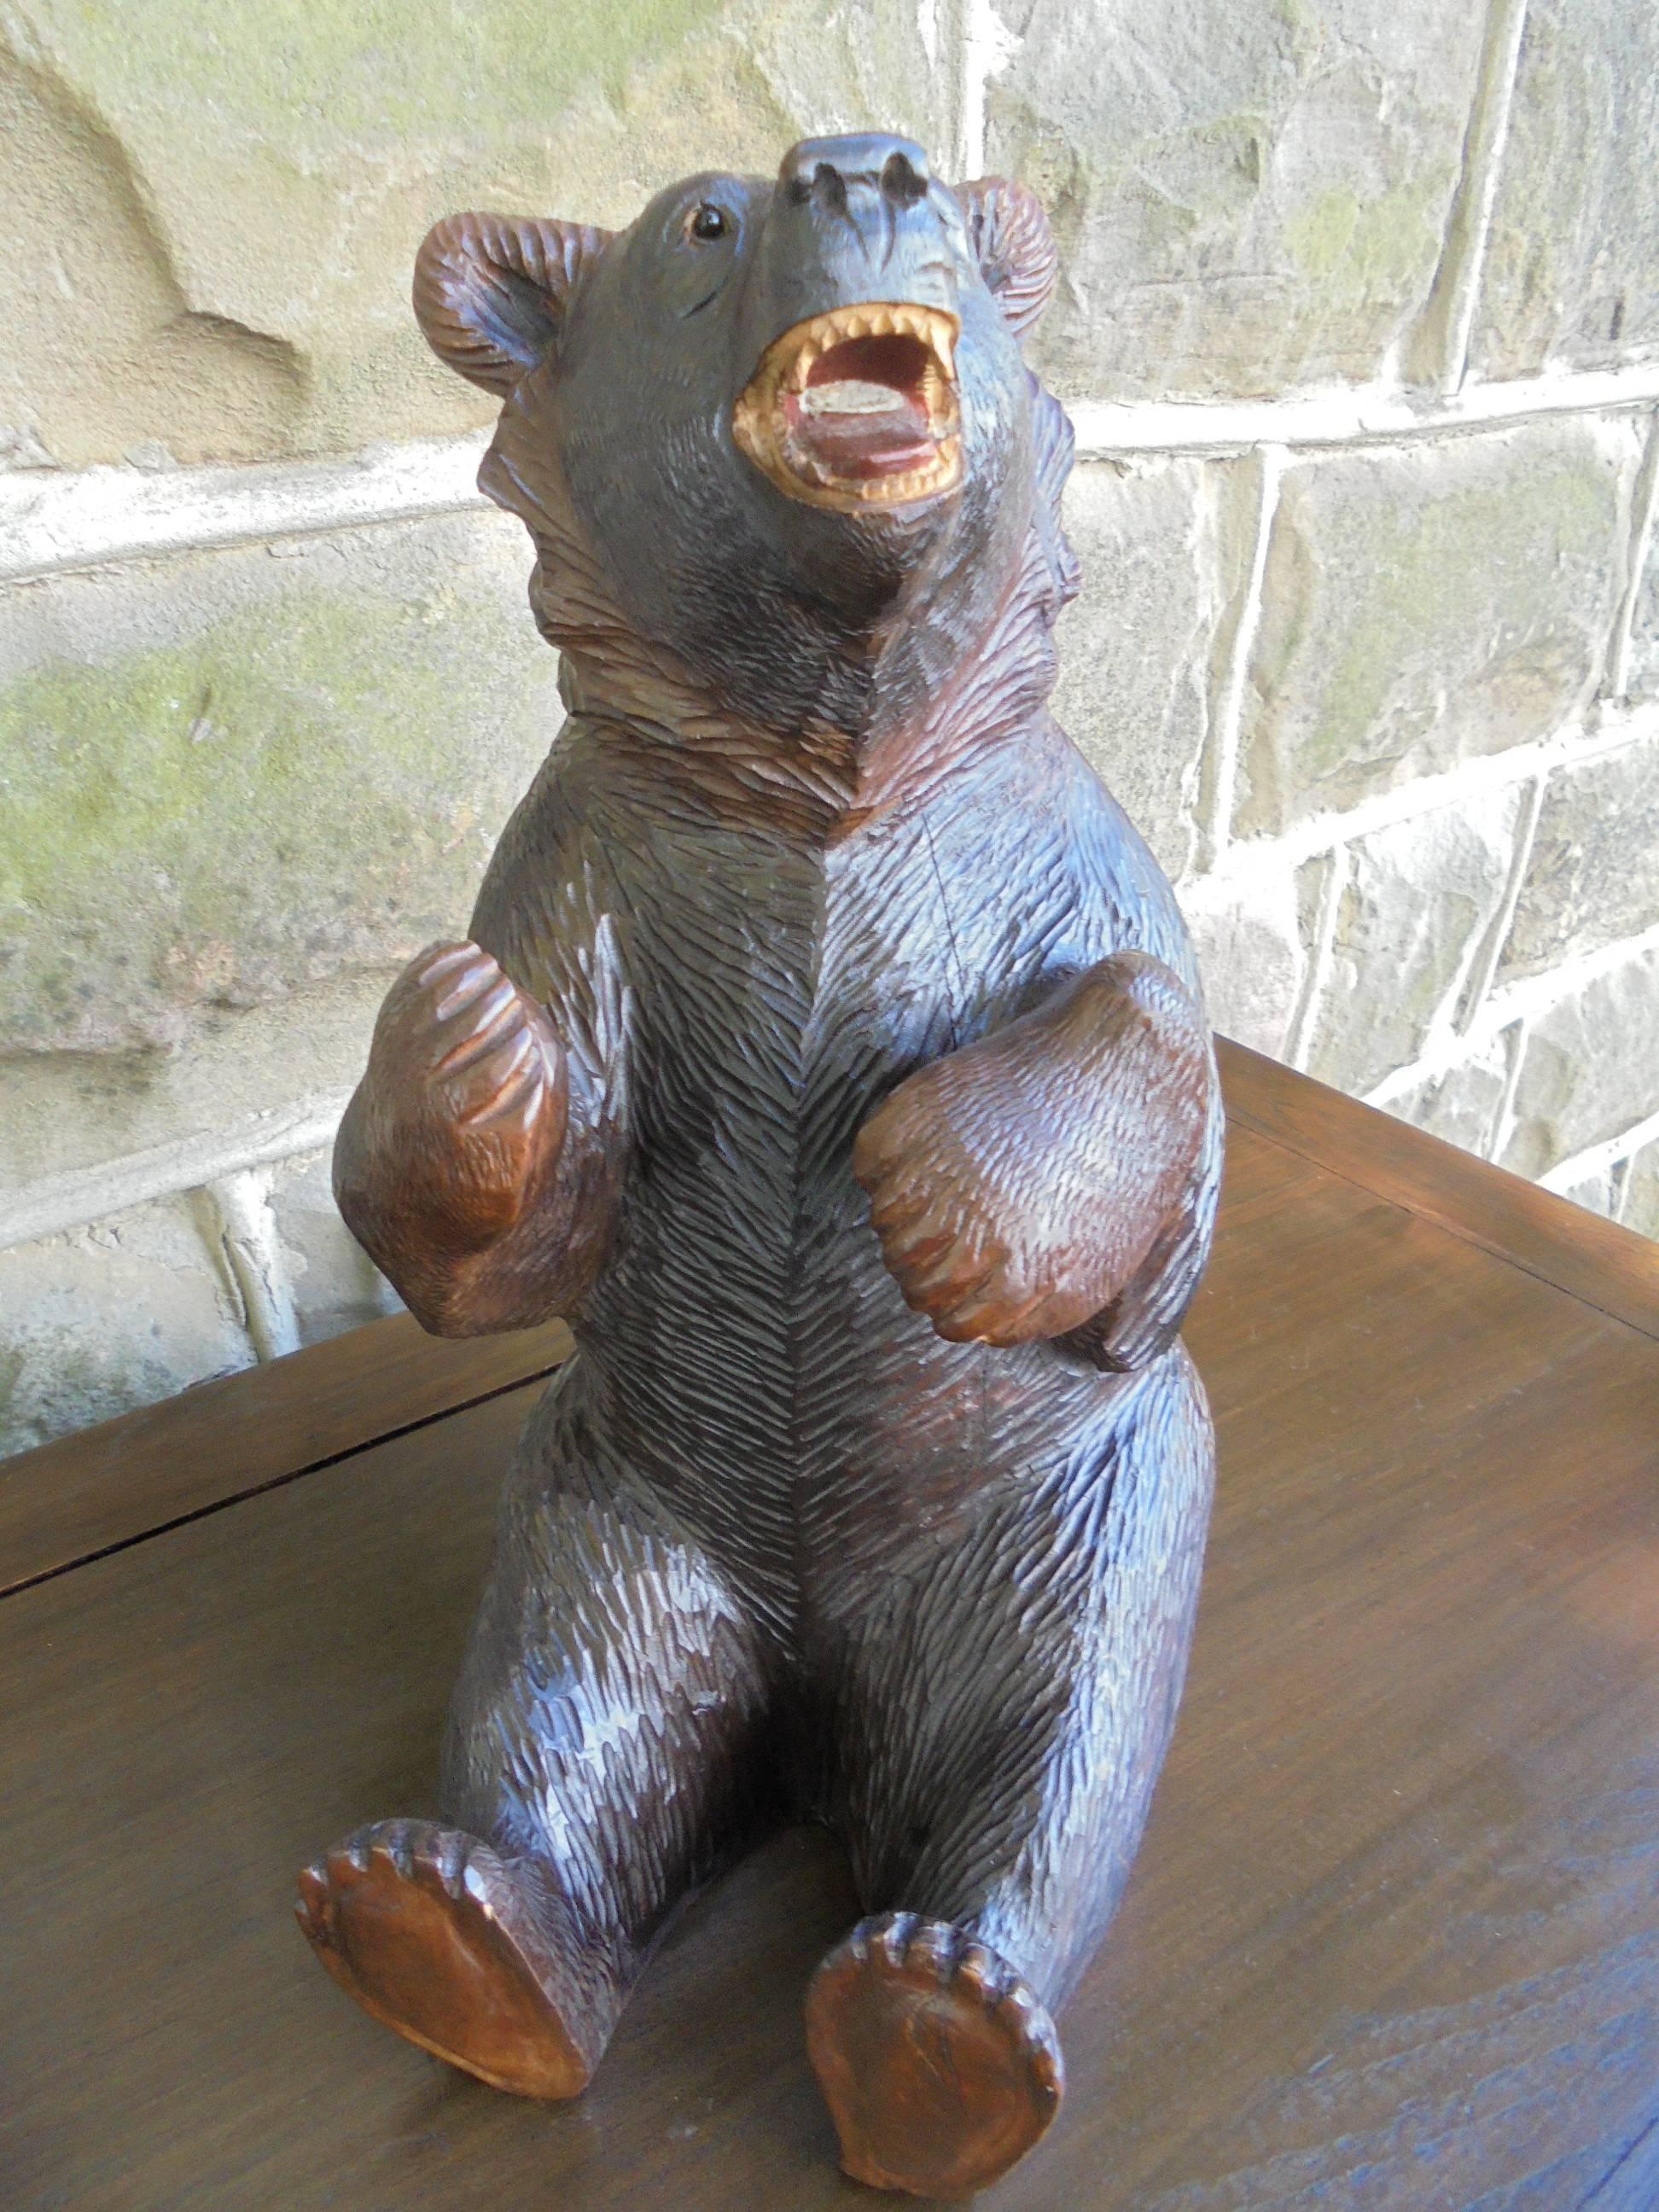 Offered for sale is this good sized antique carved Black Forest bear.

Well carved bear with good features, glass eyes. Nice original color and shine to the wood.

Offered in good original condition

Measures: Stands 15